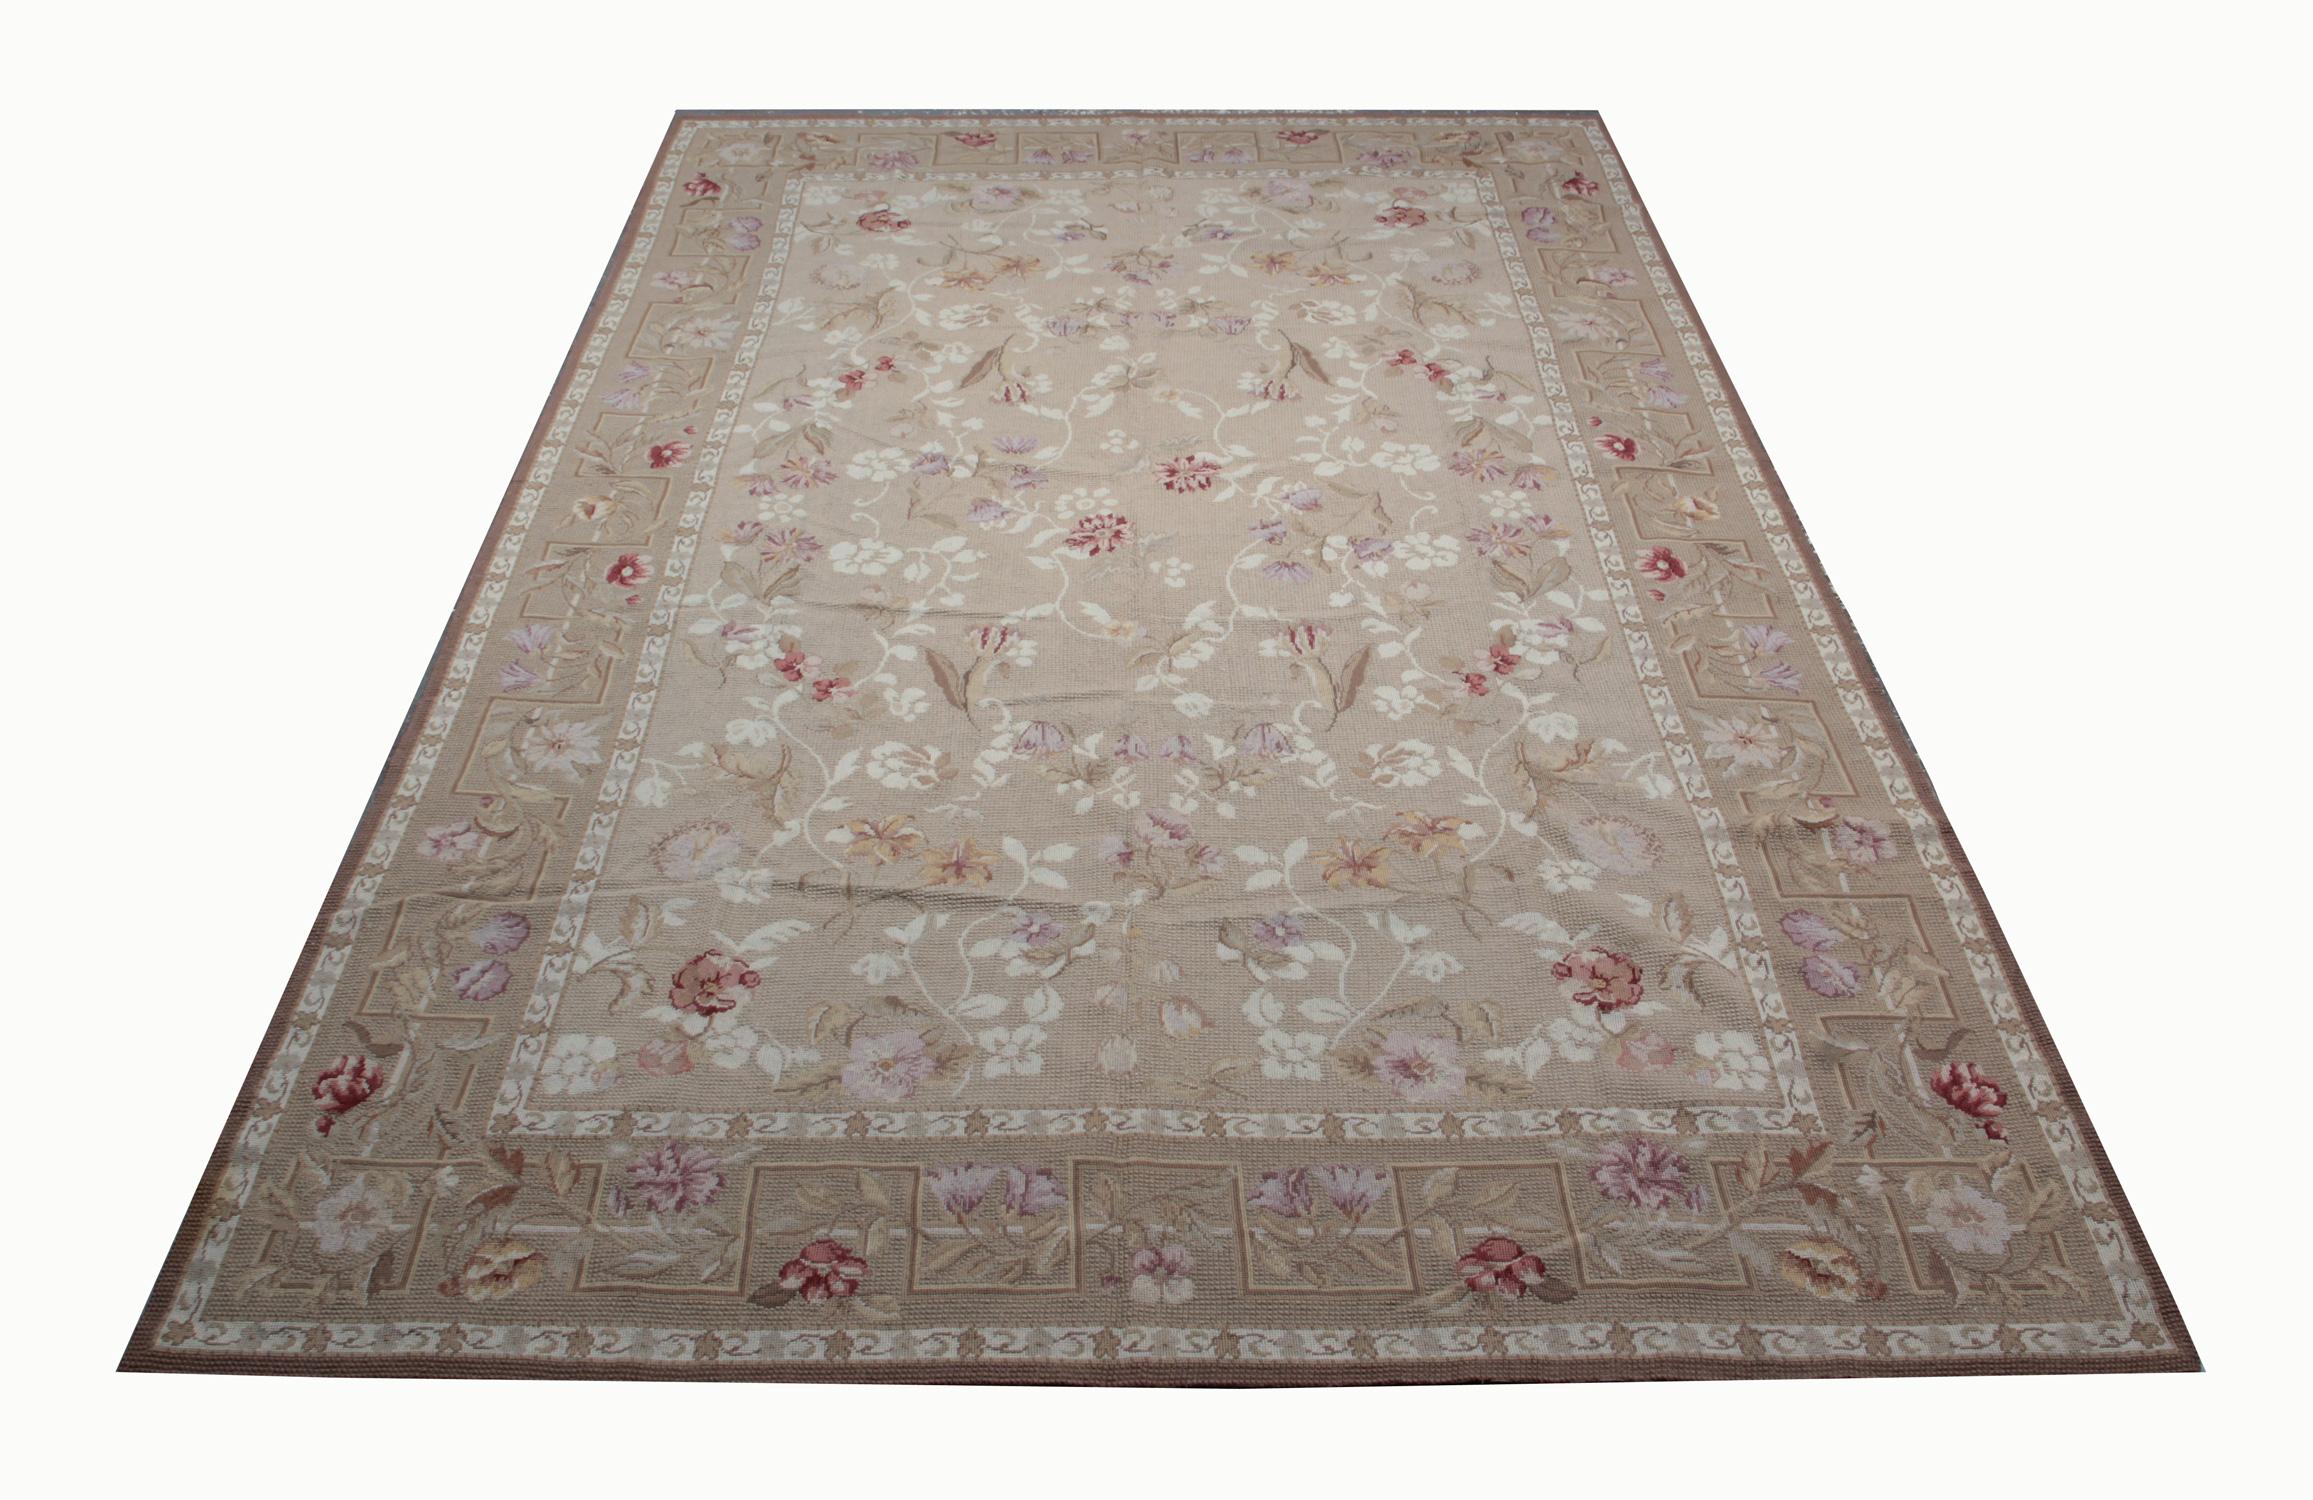 This Beige cream rug is the very good item as living room rugs and getting most of the attention in rug store by clients because of the color and design. These handmade elegant Chinese Aubusson floor rugs has The soft shade of colors. these luxury